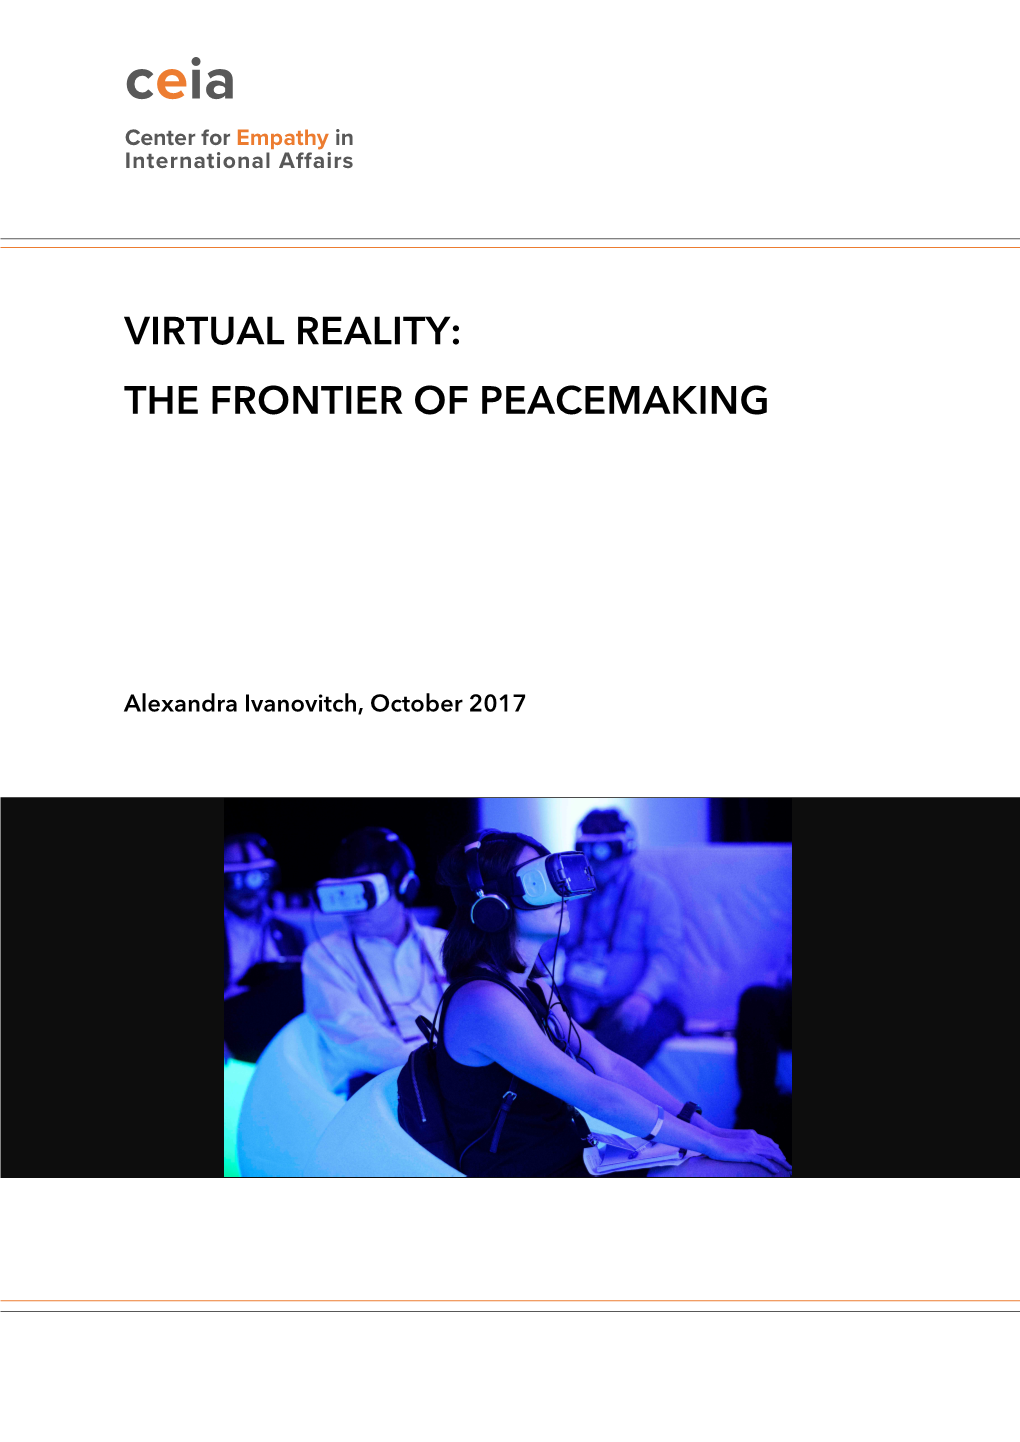 Virtual Reality: the Frontier of Peacemaking